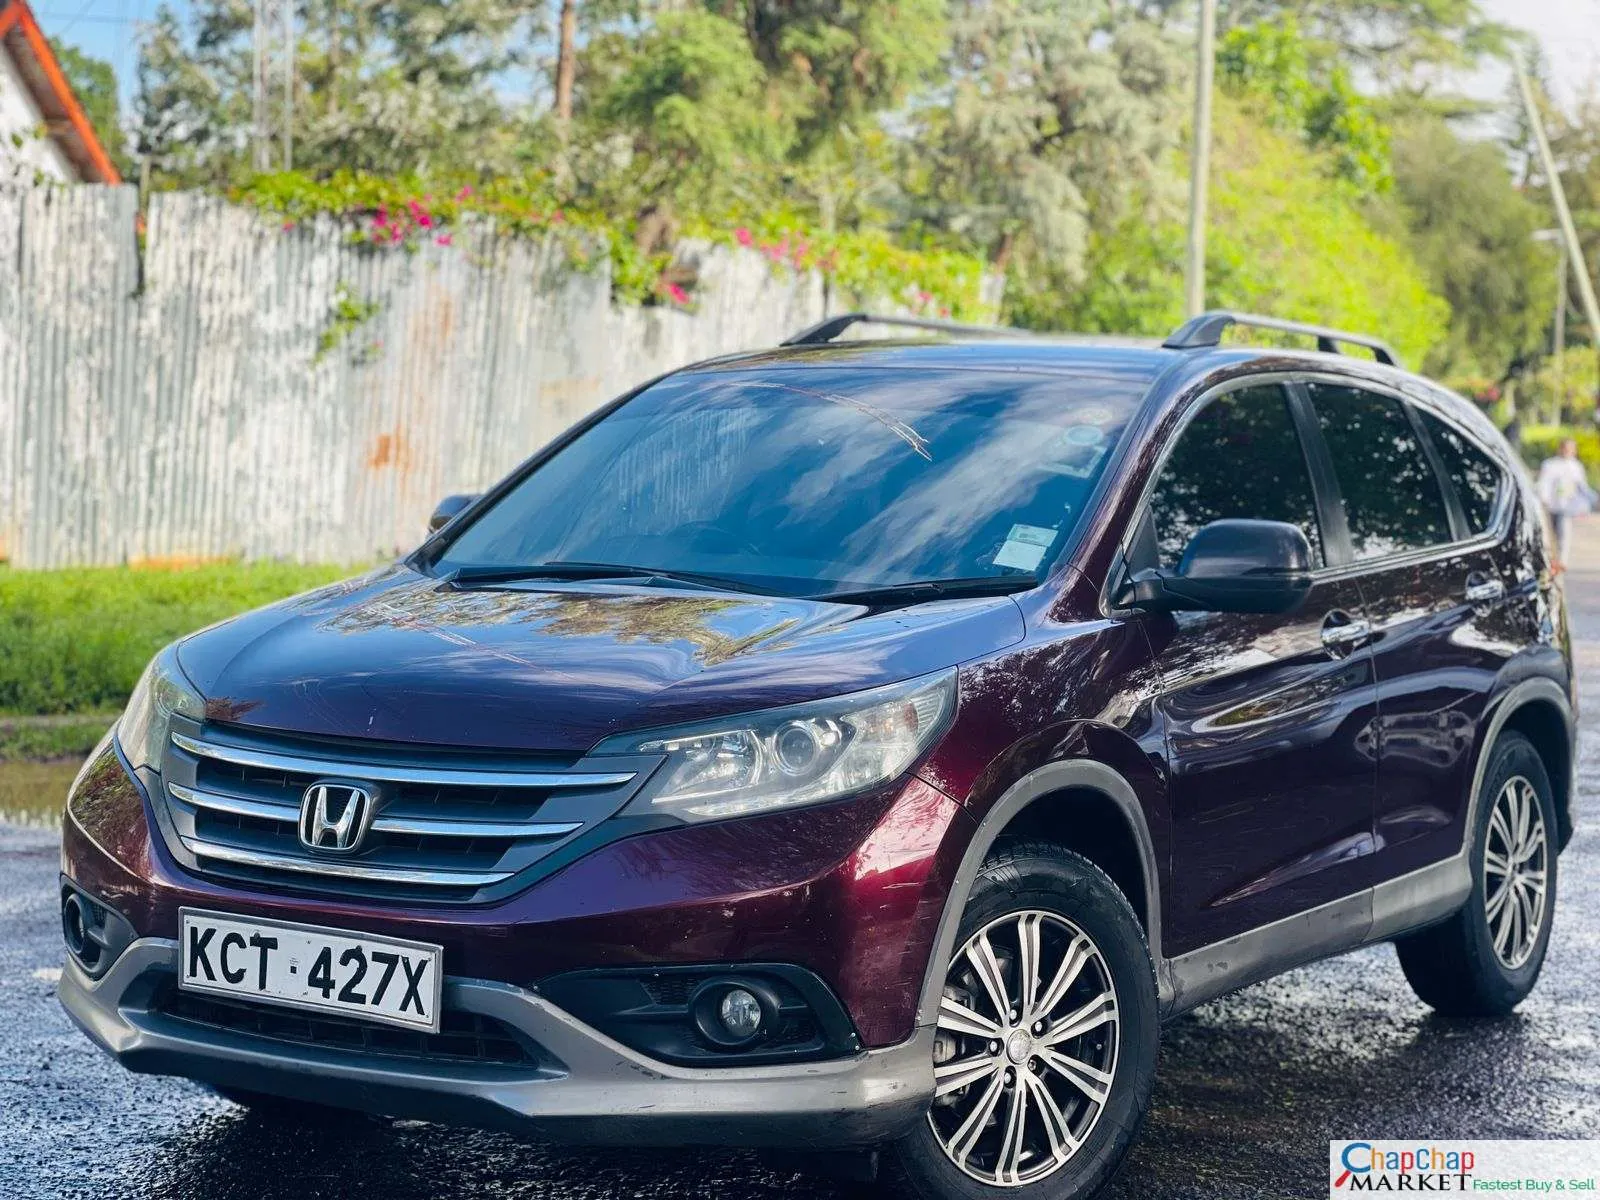 Cars Cars For Sale/Vehicles-Honda CR-V New Shape You Pay 30% Deposit installments Trade in OK as NEW 7